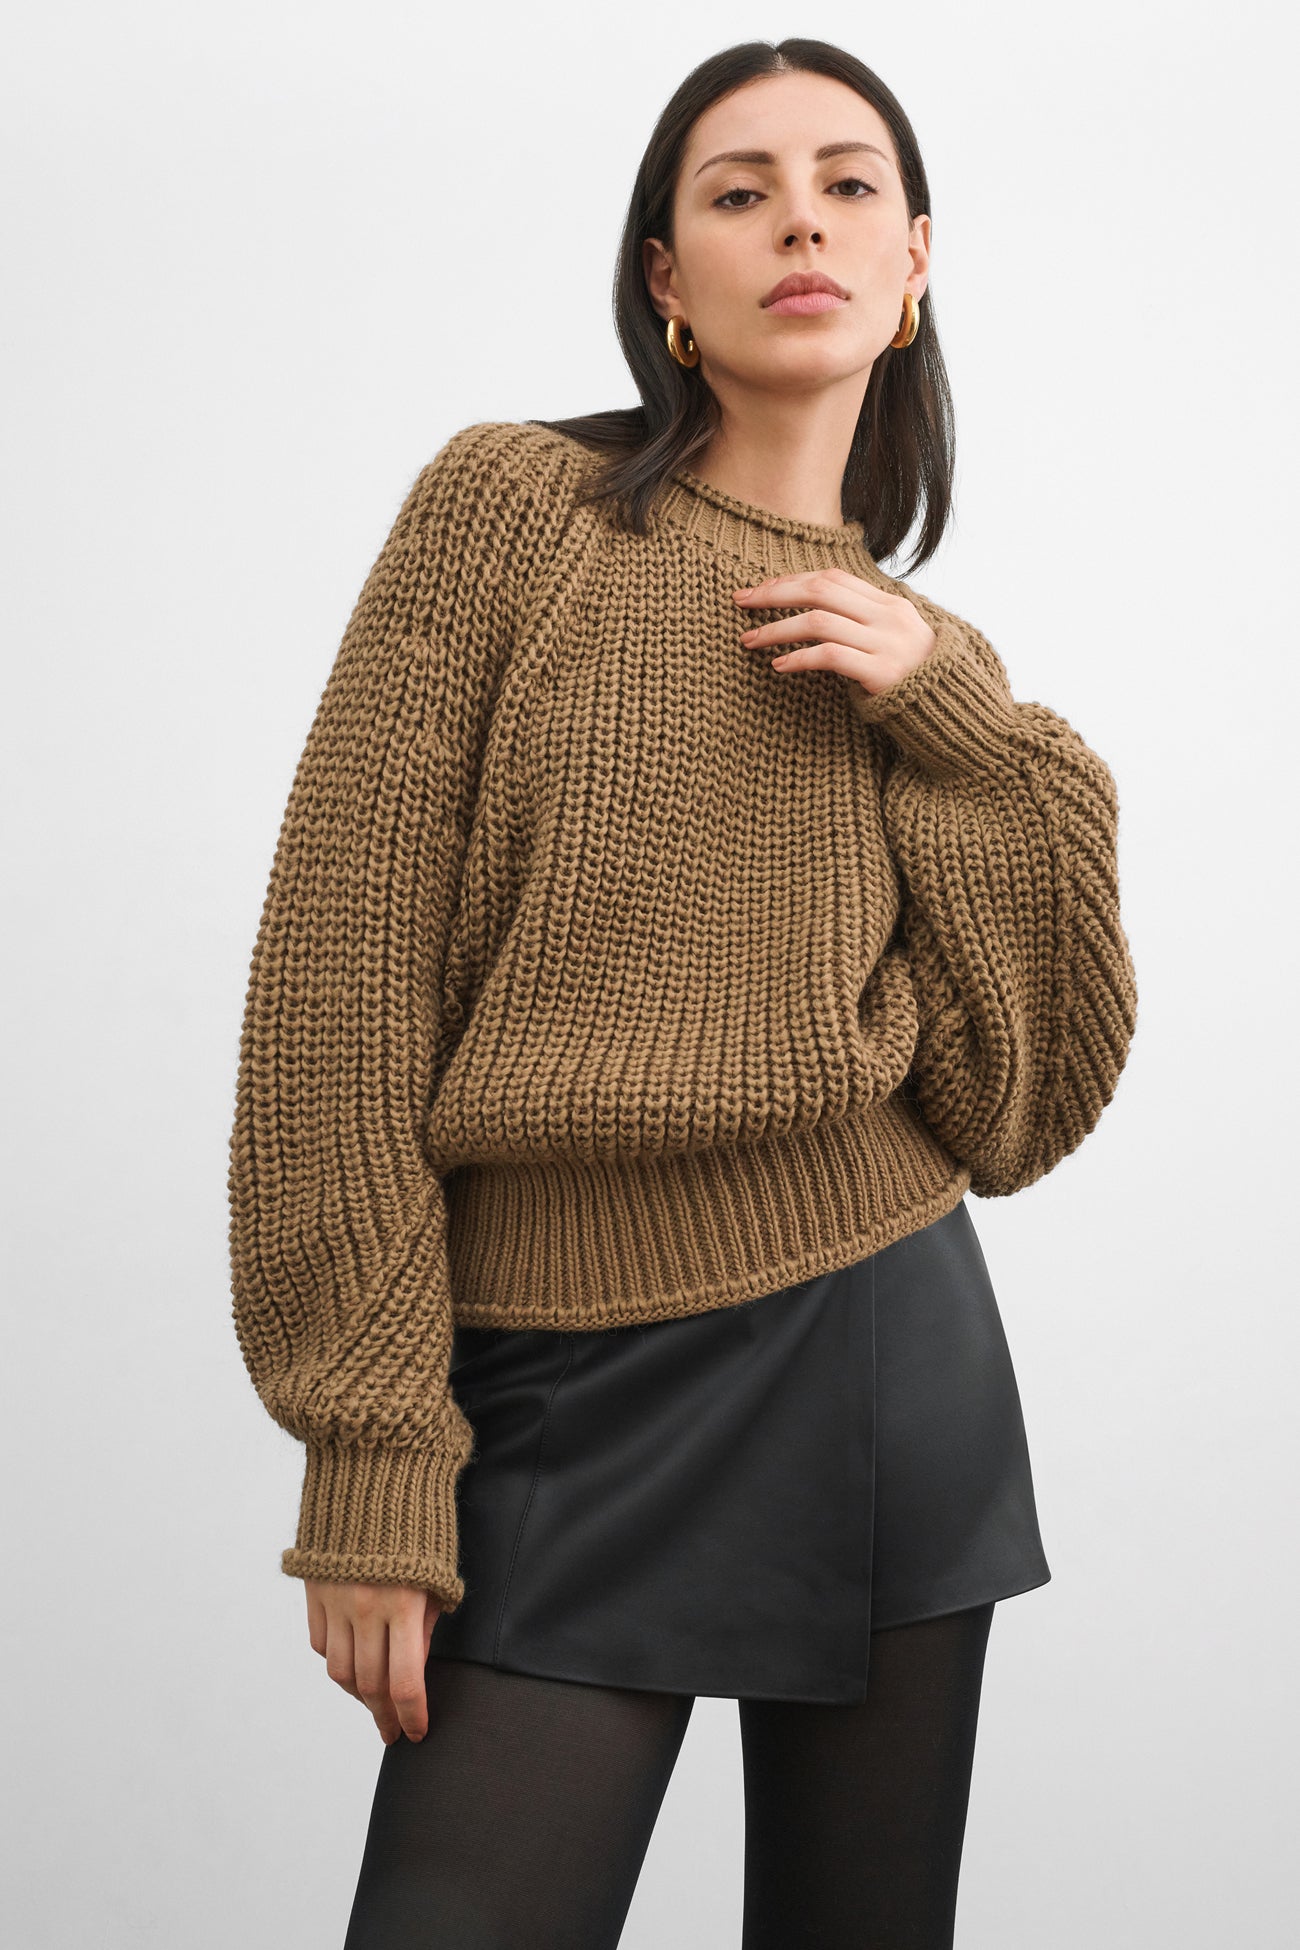 Camel Tan Knit Pullover Sweater Top - Lark Knit Sweater | Marcella